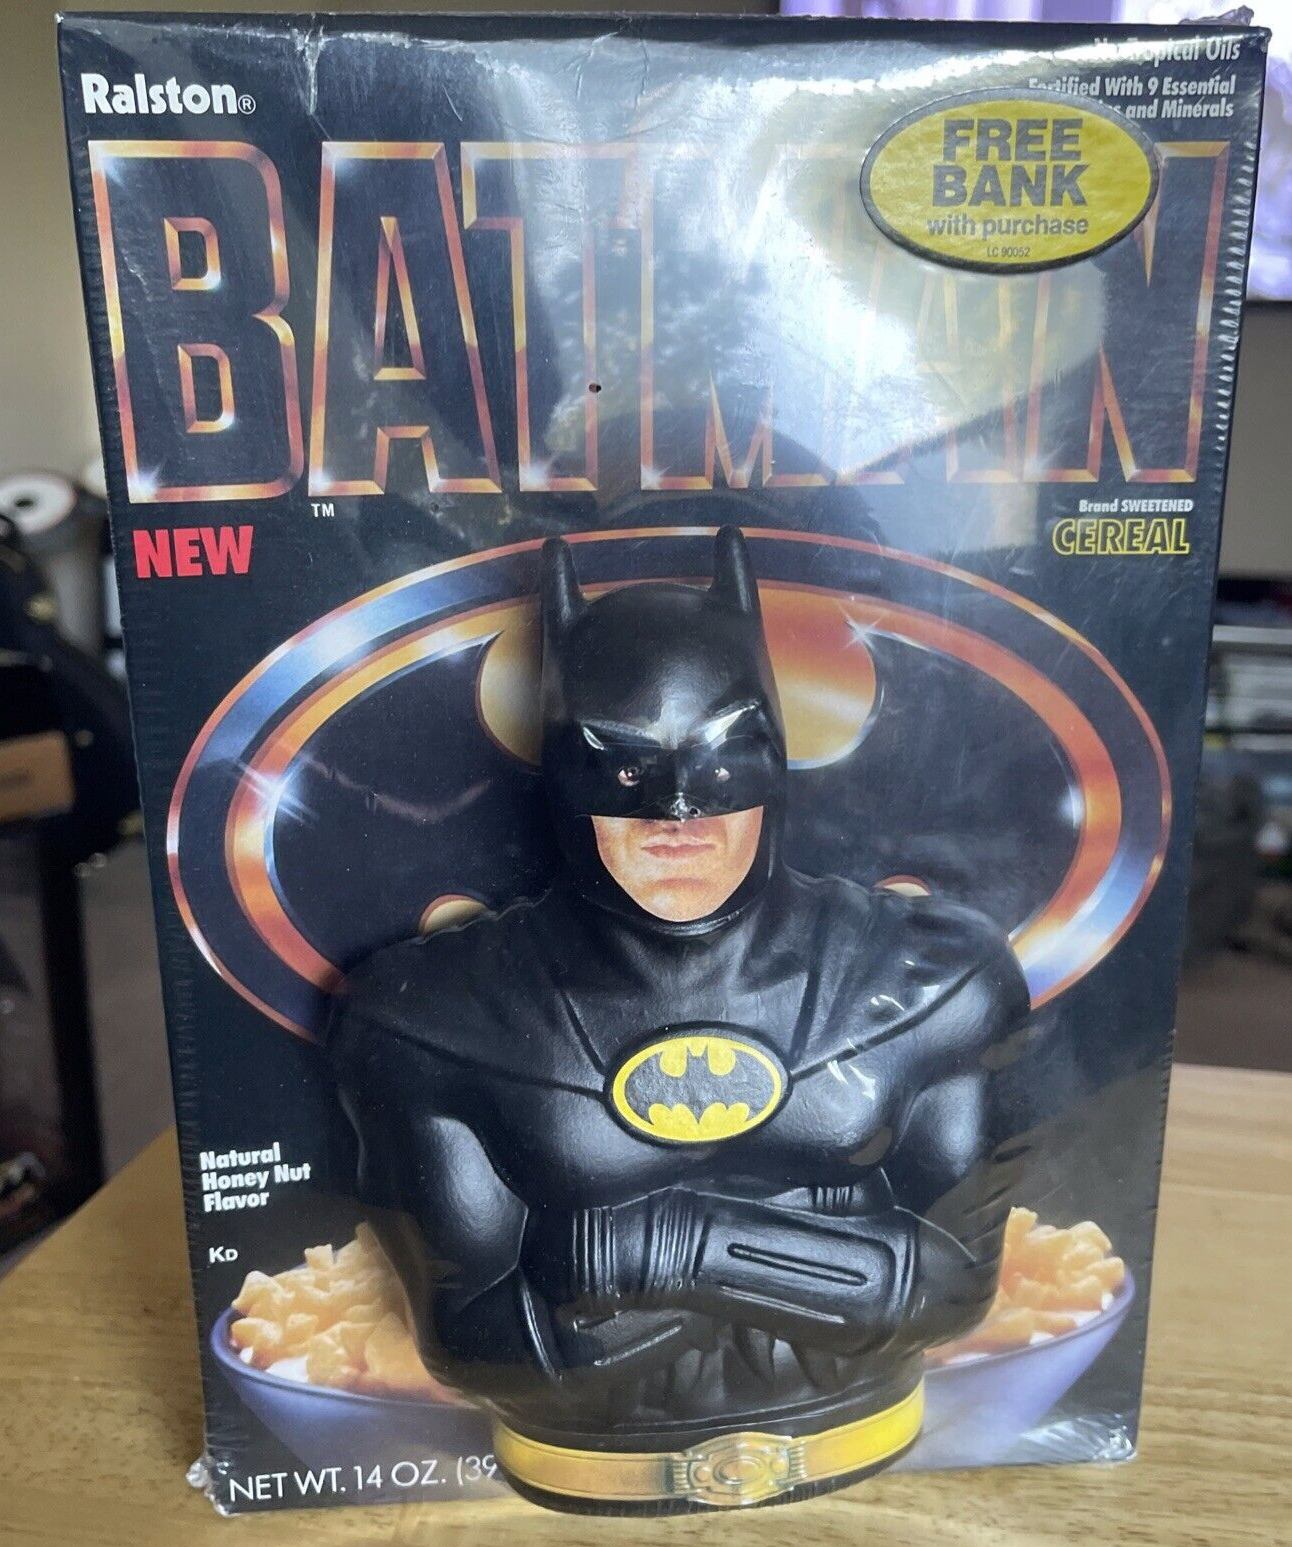 Vintage 1989 Ralston BATMAN Cereal Box NEW SEALED with Coin Bank Toy